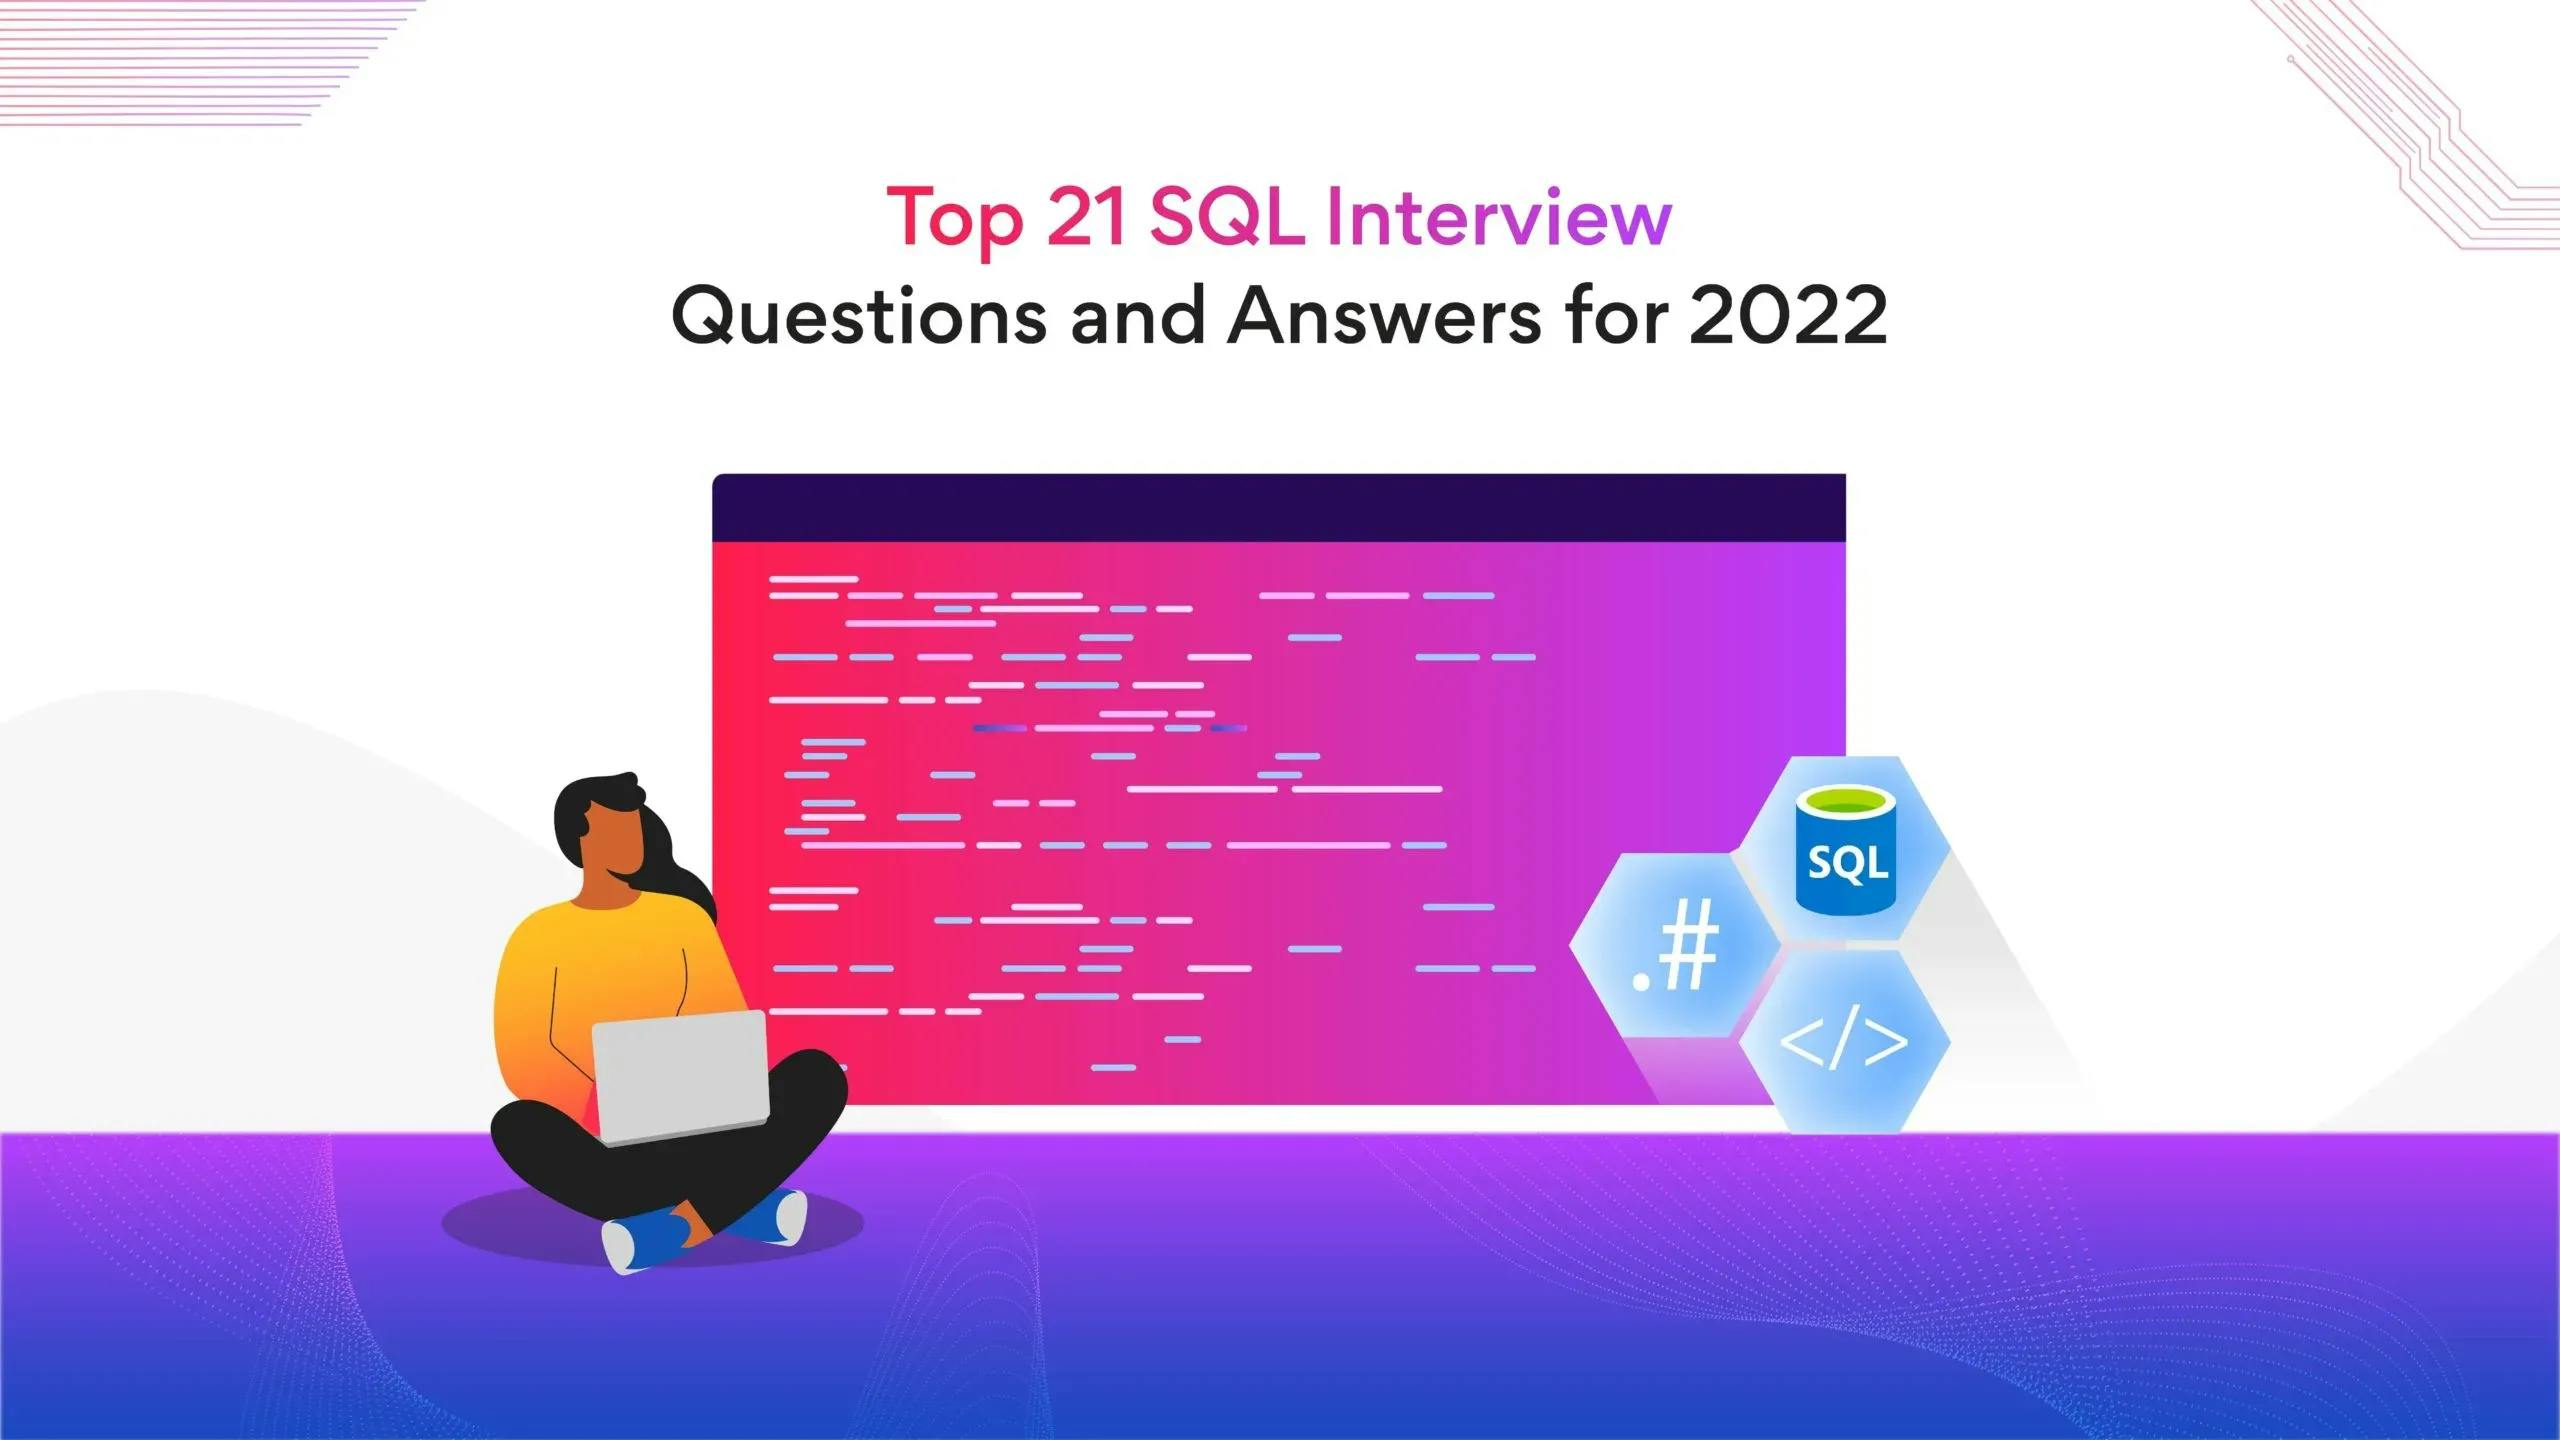 Top 21 SQL Interview Questions and Answers 